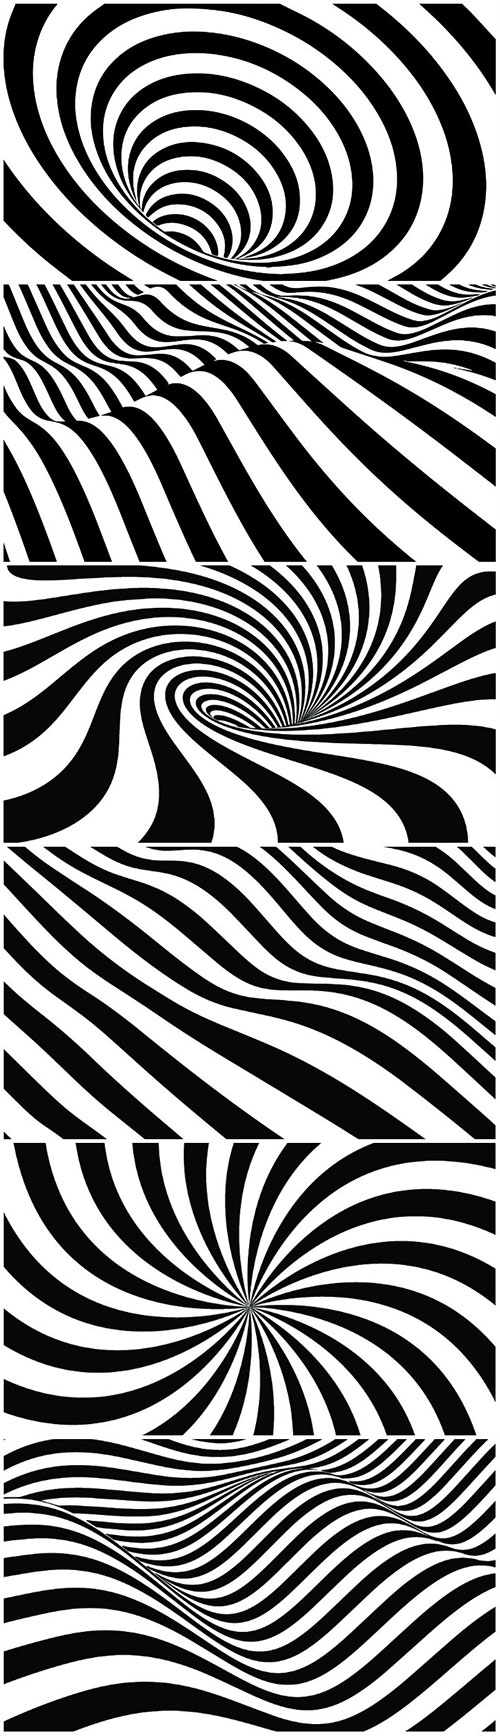 Black and white 3d vector lines background